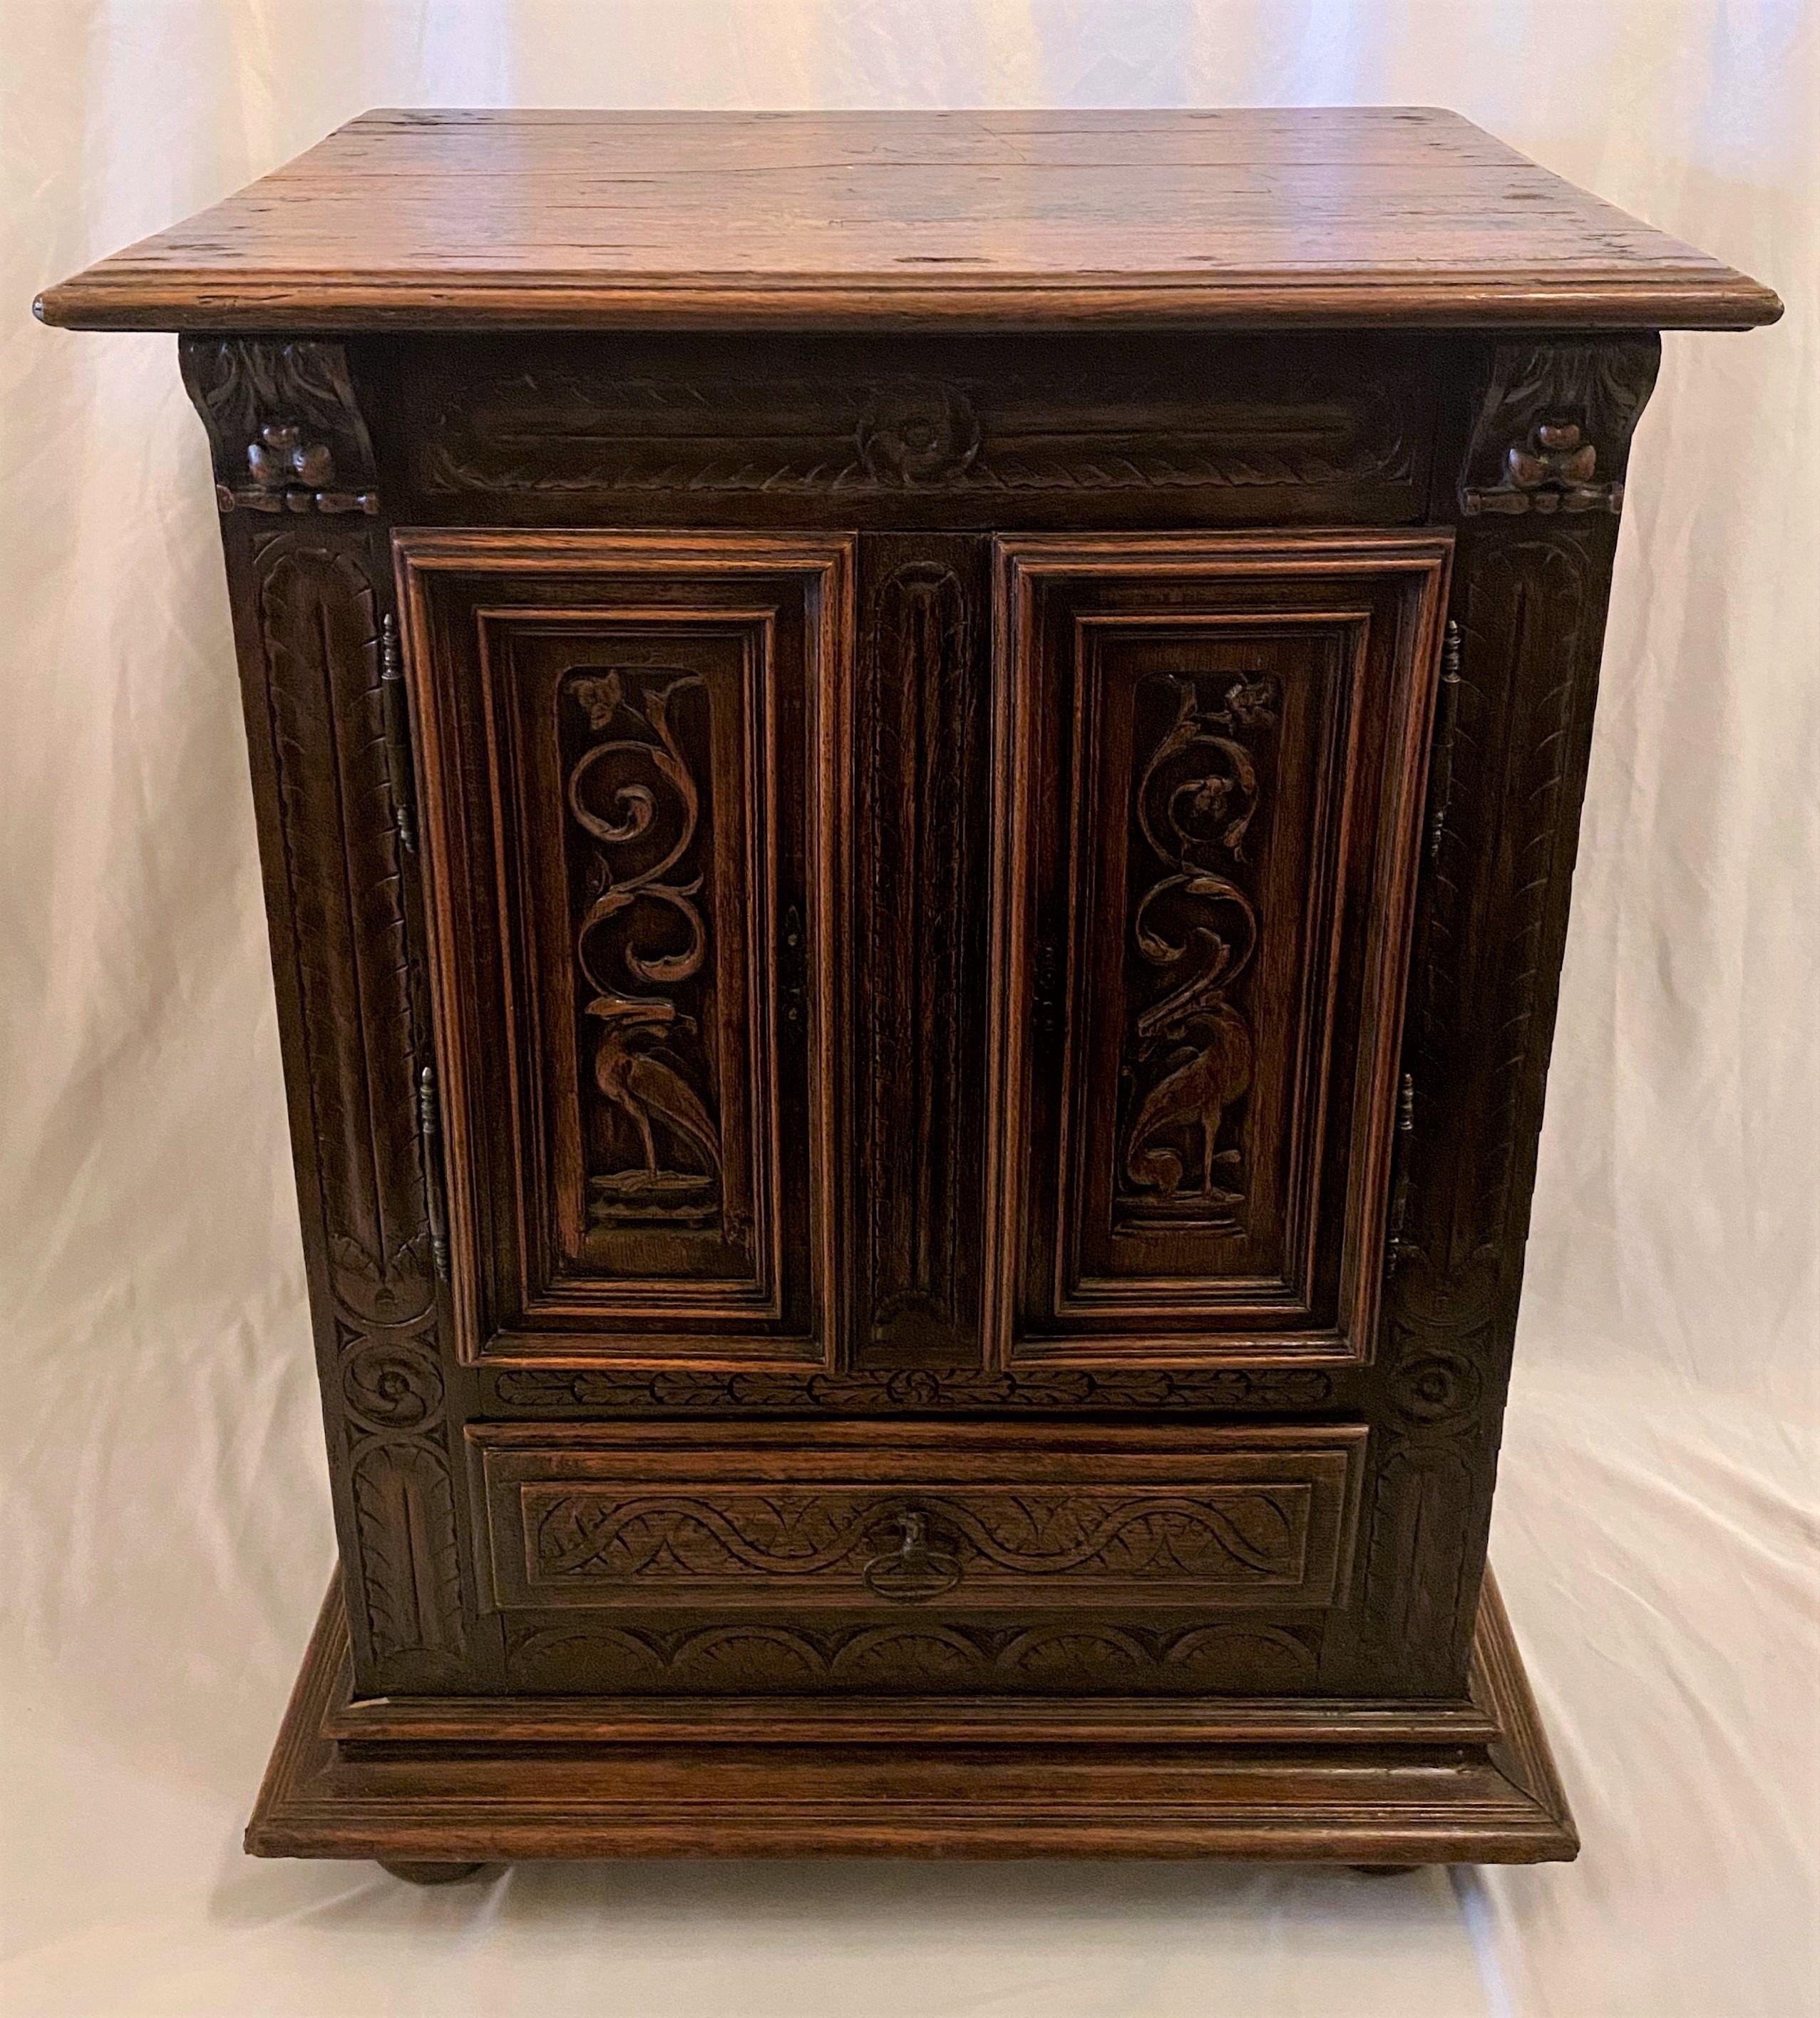 Antique French finely carved oak night table, circa 1870-1880.